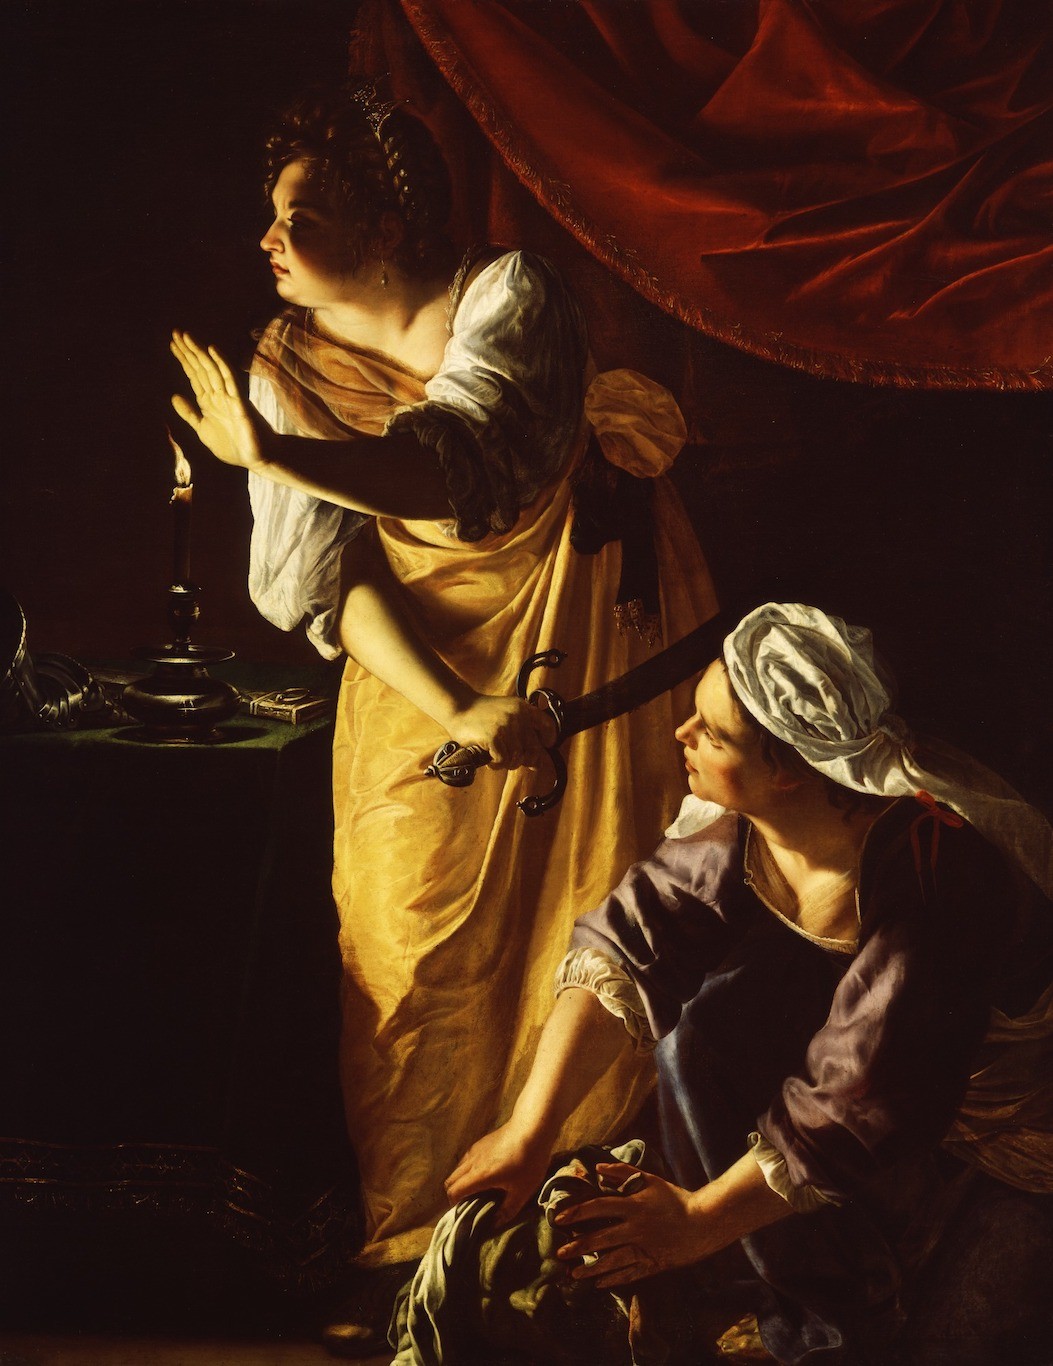 Artemisia_Gentileschi_-_Judith_and_Her_Maidservant_with_the_Head_of_Holofernes_-_52.253_-_Detroit_Institute_of_Arts.jpg